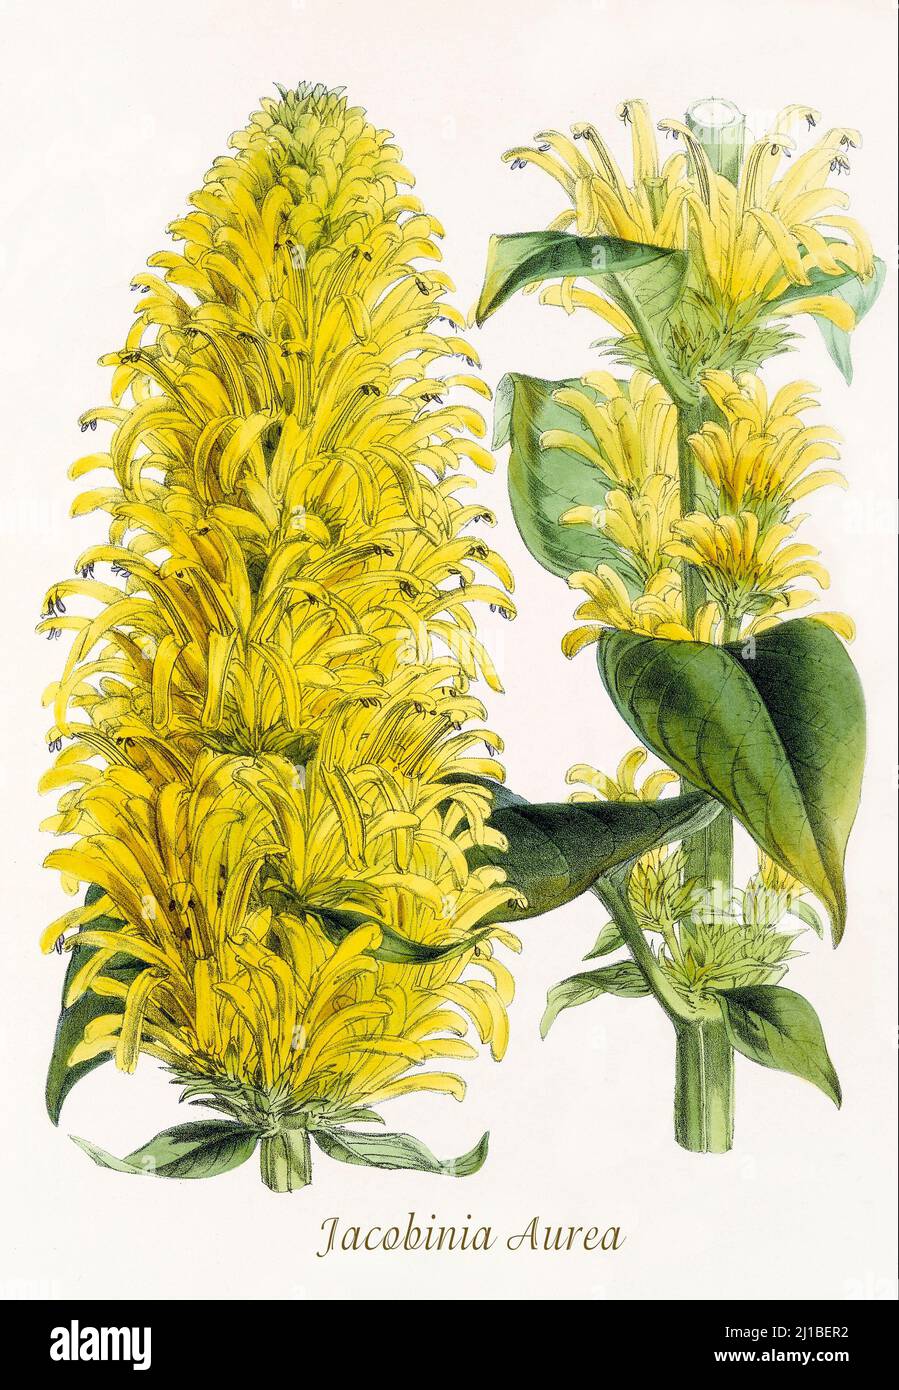 A late 19th century illustration of Jacobinia Aurea now called Justicia aurea, from the Family Acanthaceae, aka the Brazilian plume or yellow jacobinia, is an ornamental shrub native to the Cerrado vegetation of Brazil. From Biologia Centrali-Americana, aka Contributions to the knowledge of the fauna and flora of Mexico and Central America by William Botting. Published in London in 1879 Stock Photo